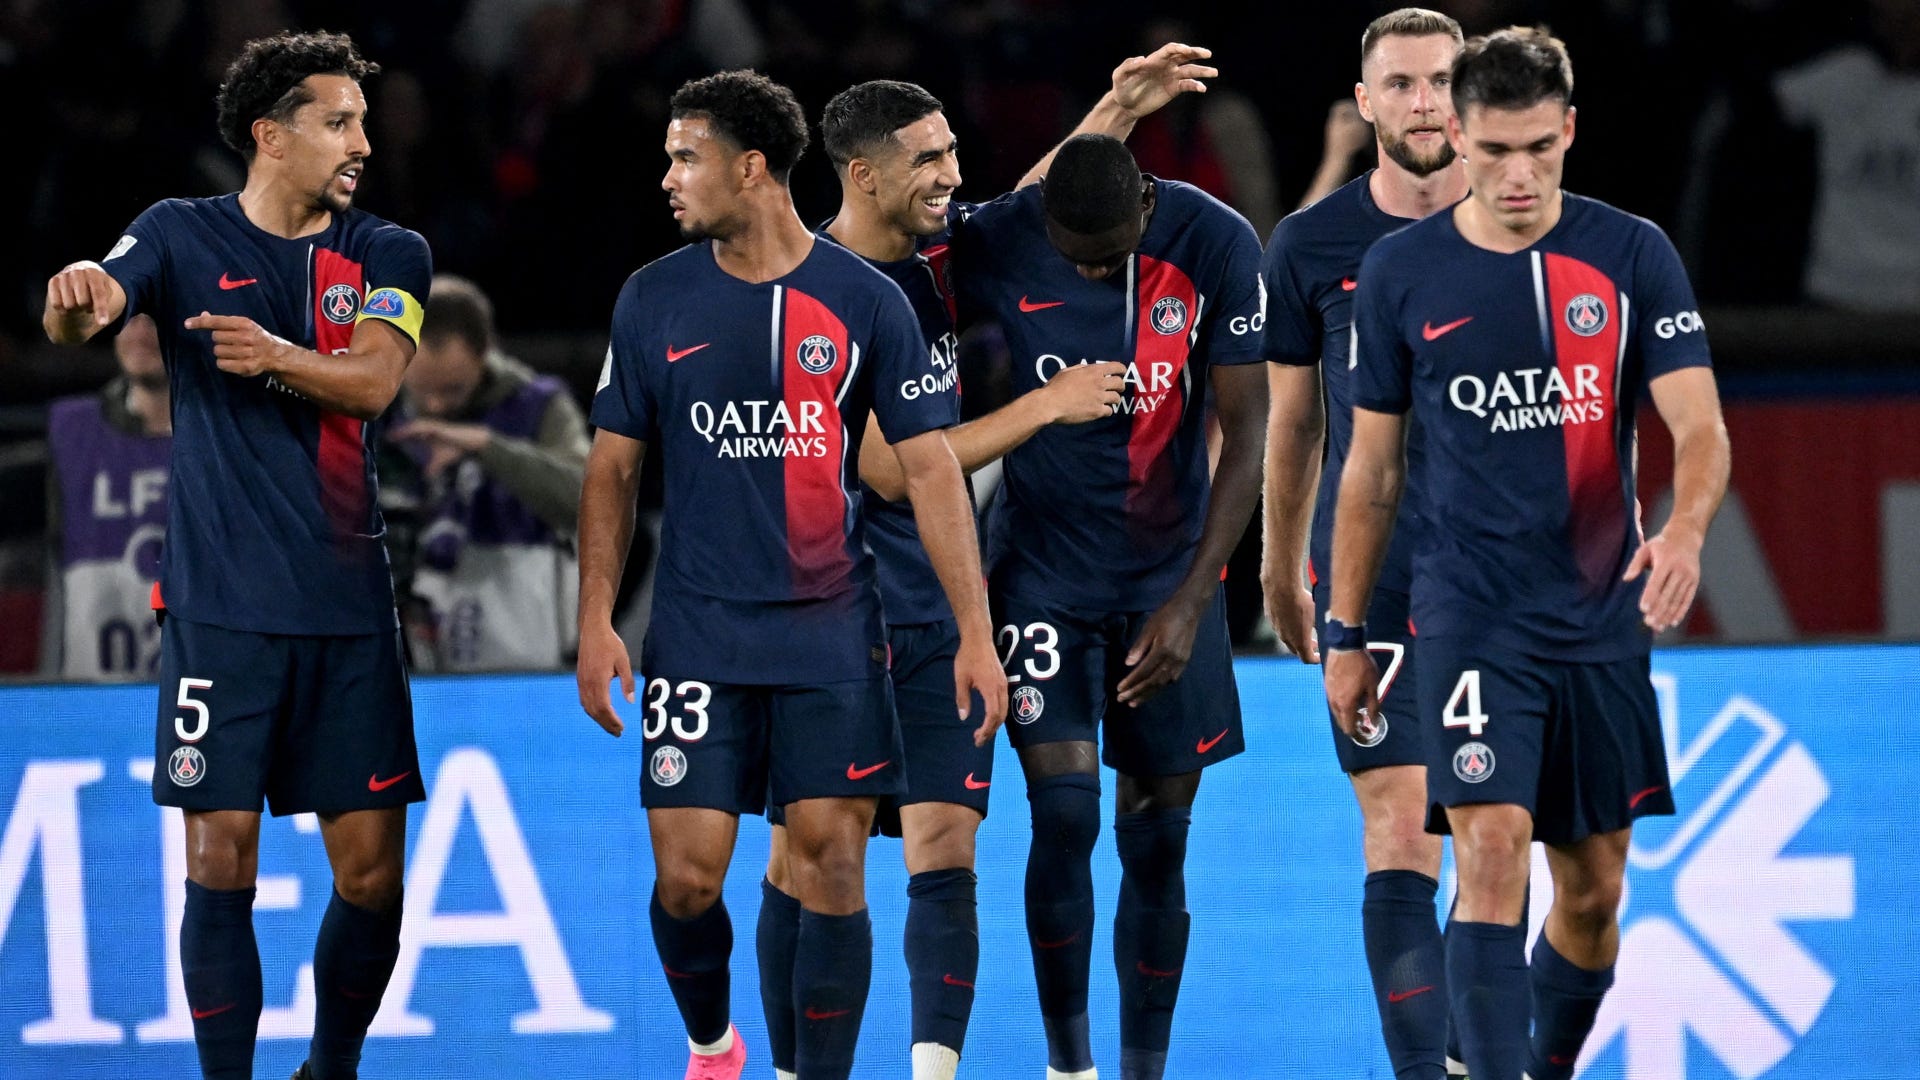 Clermont vs PSG Where to watch the match online, live stream, TV channels, and kick-off time Goal US